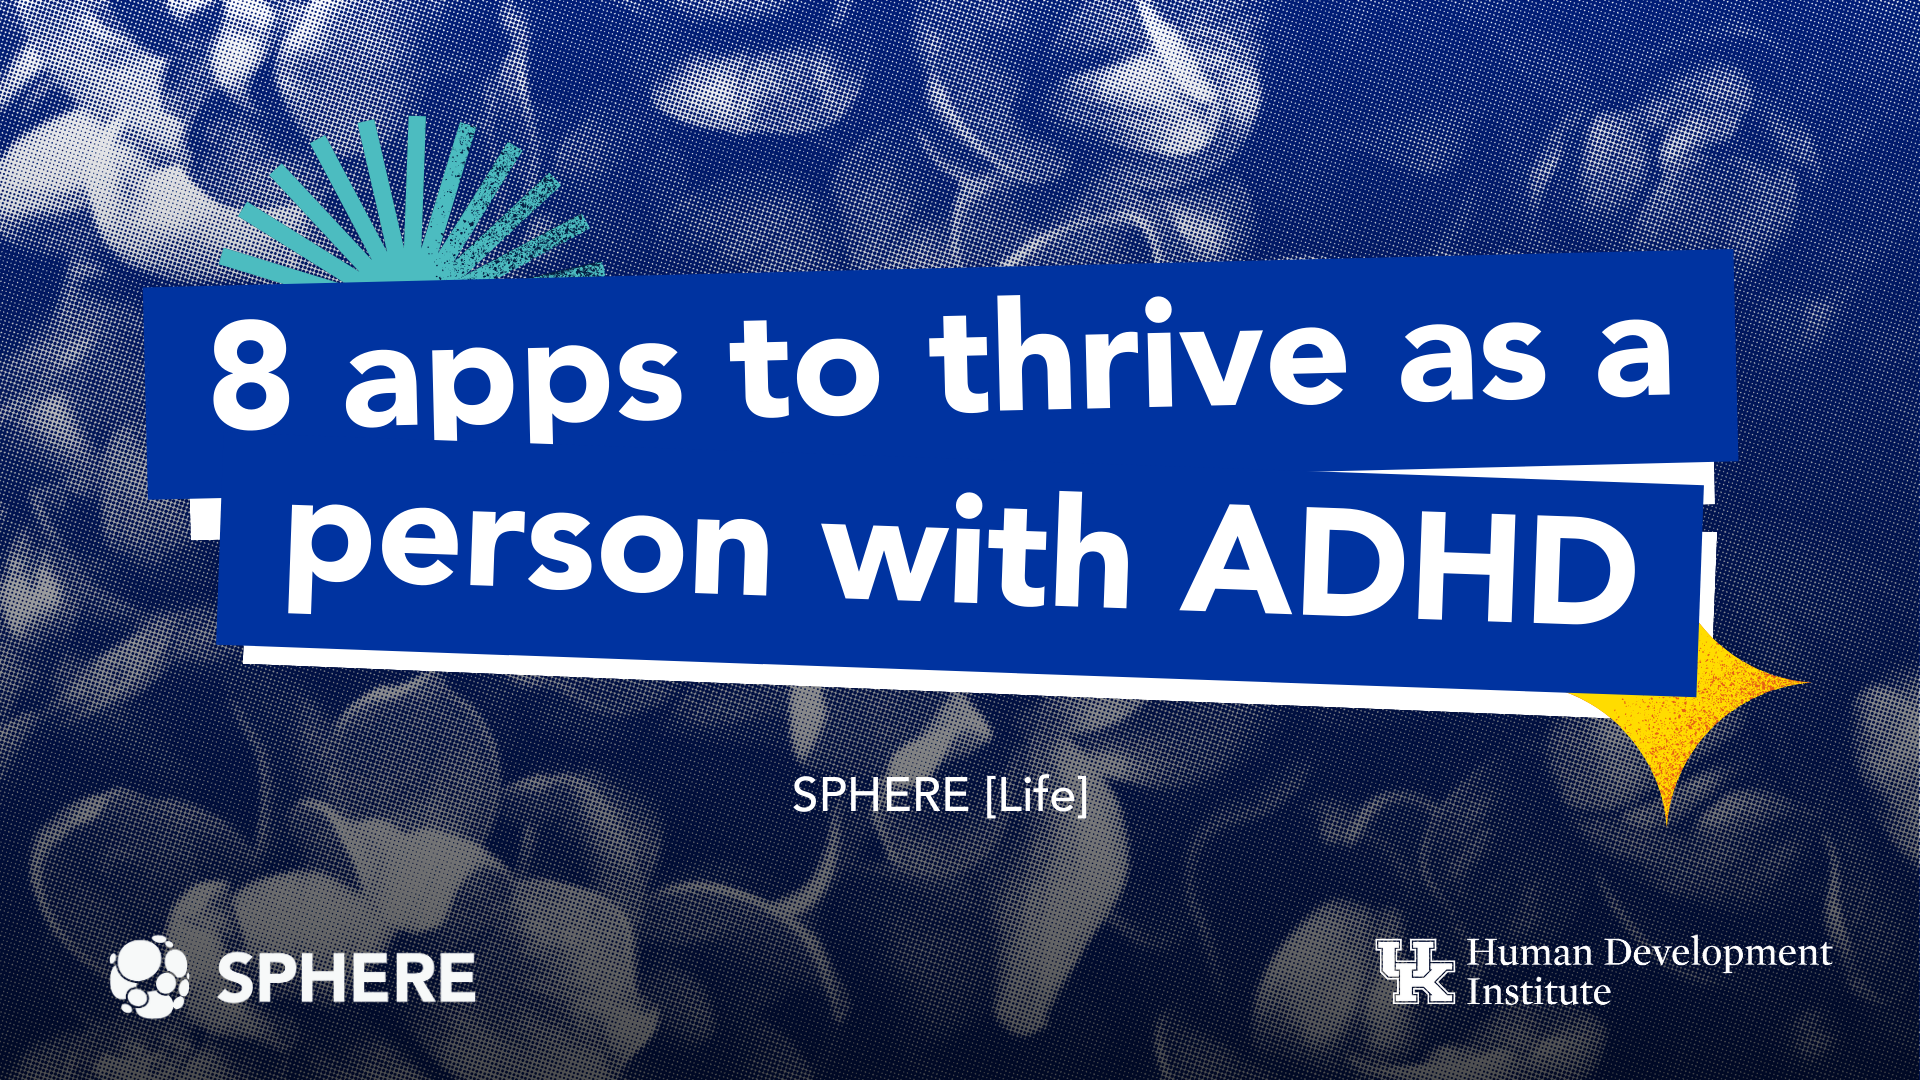 8 apps to thrive as a person with ADHD